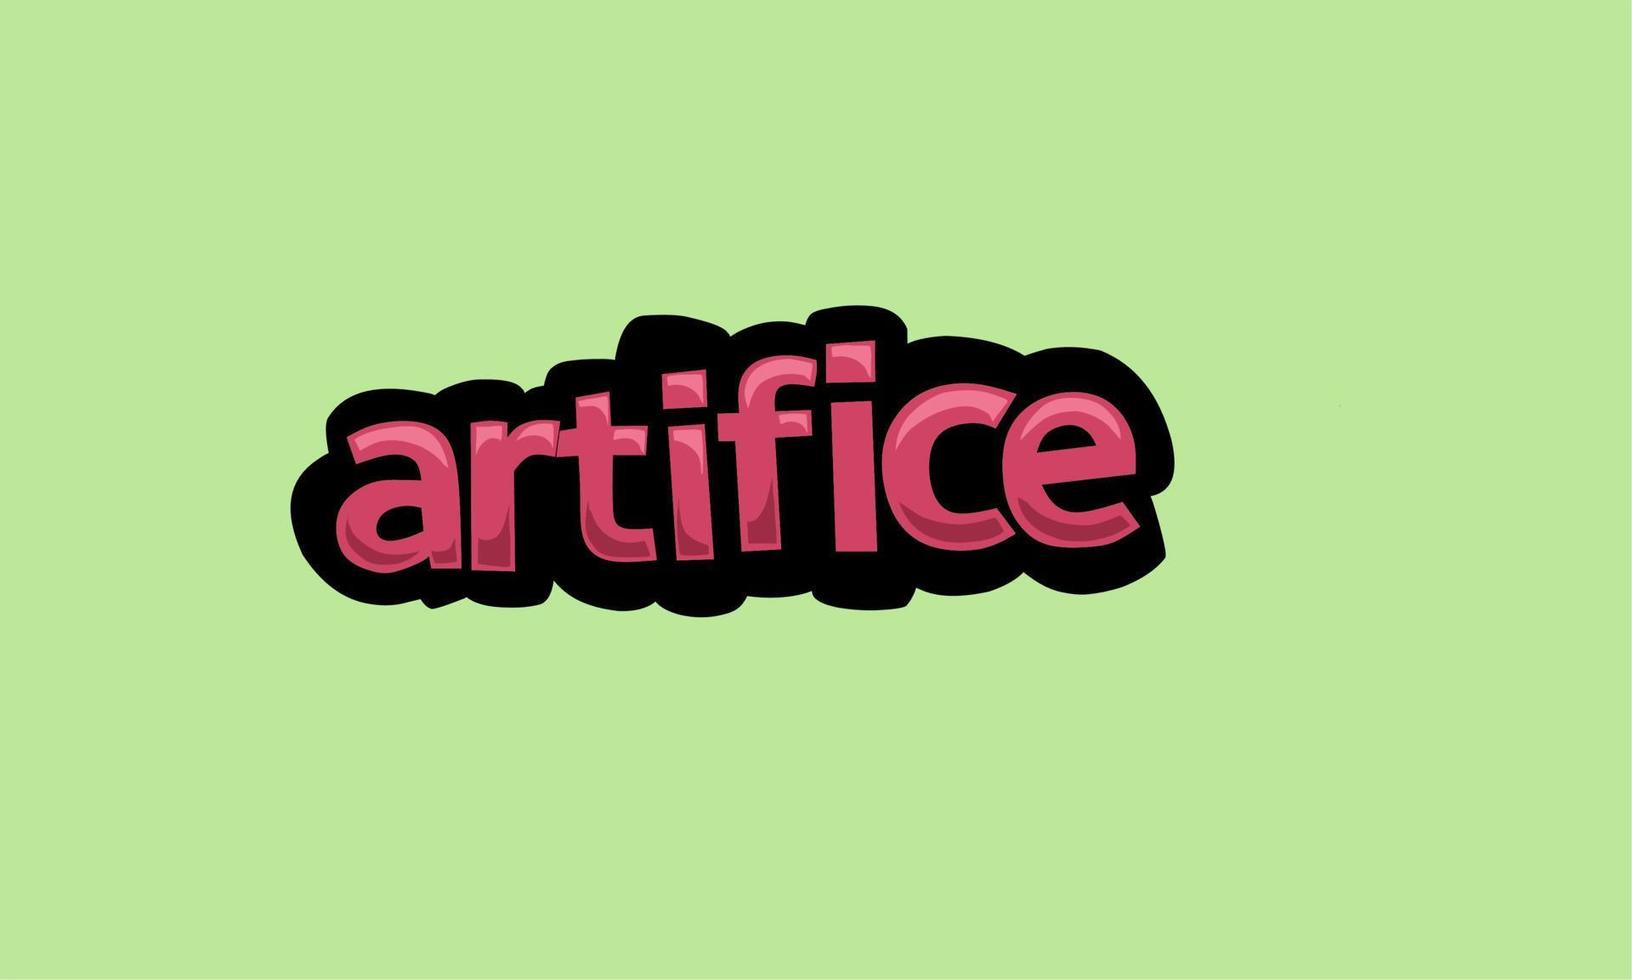 ARTIFICE writing vector design on a green background